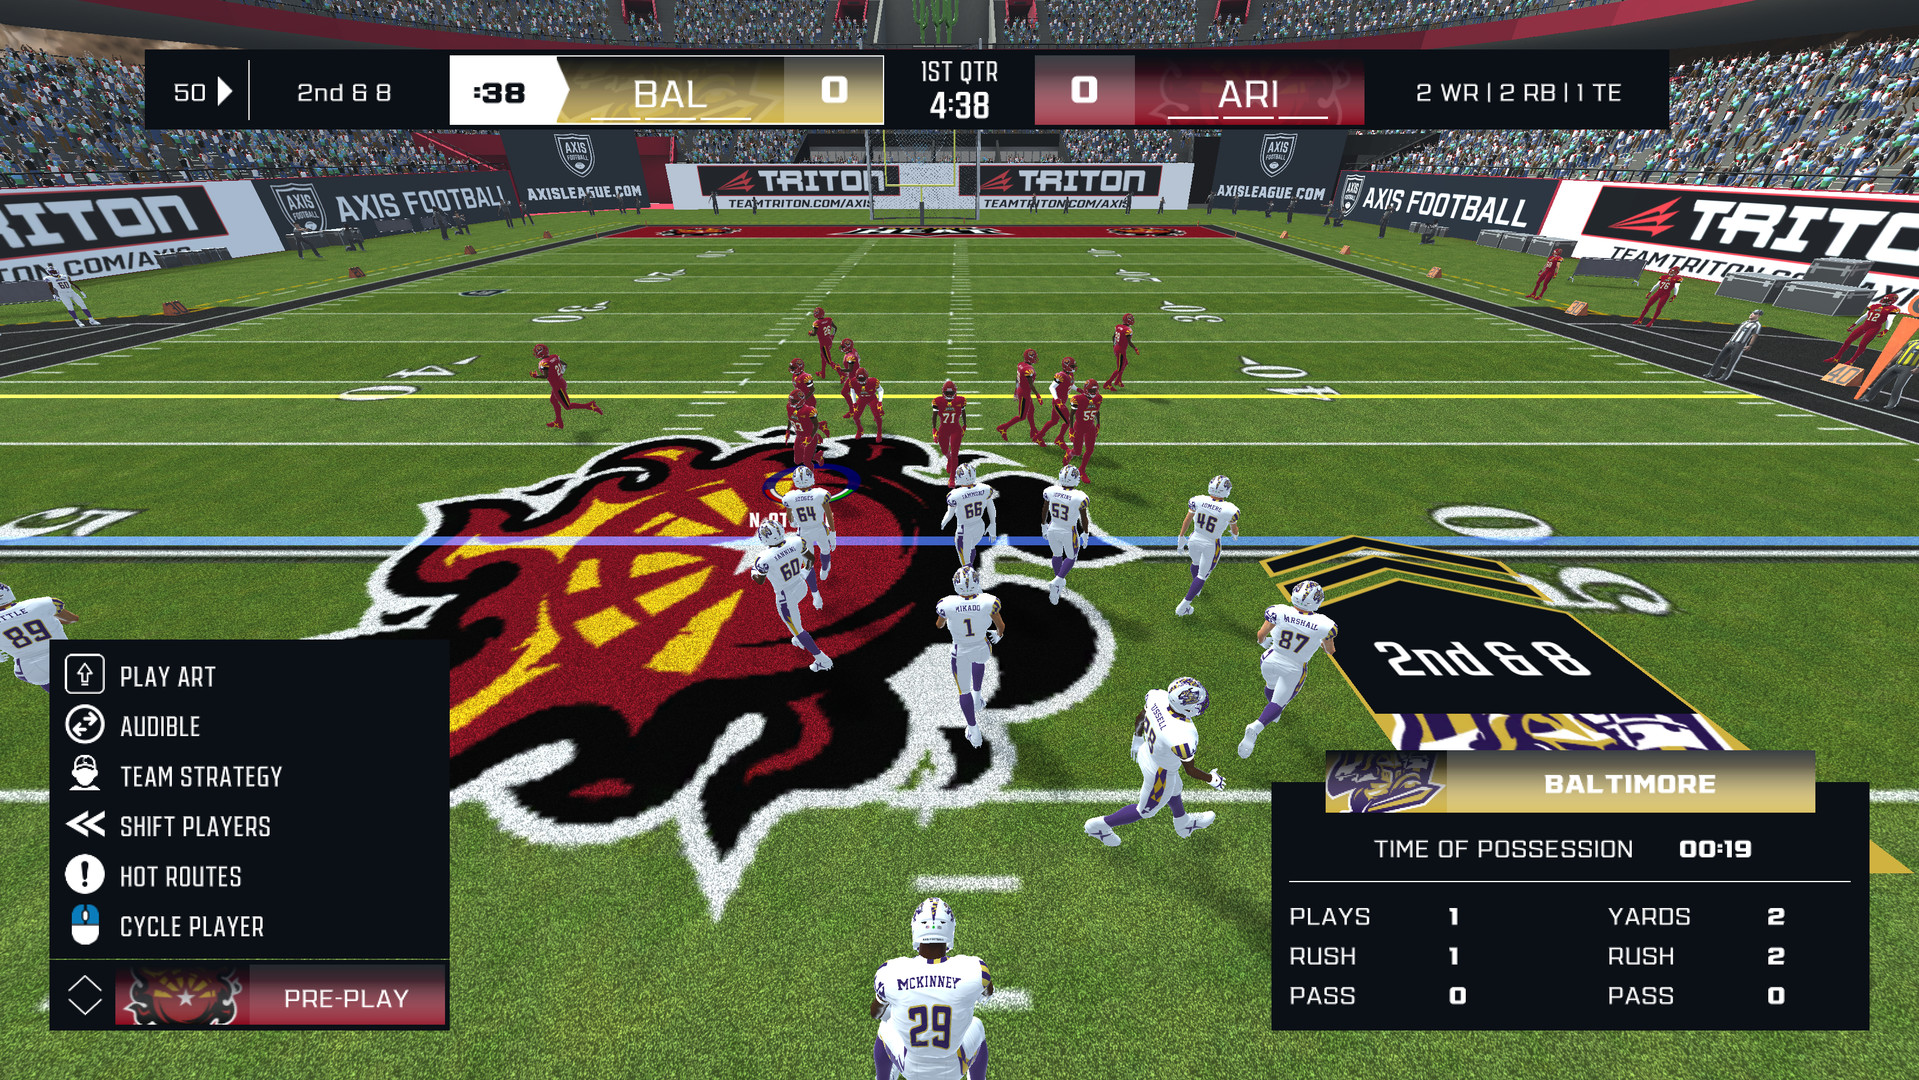 Find the best computers for Axis Football 2021